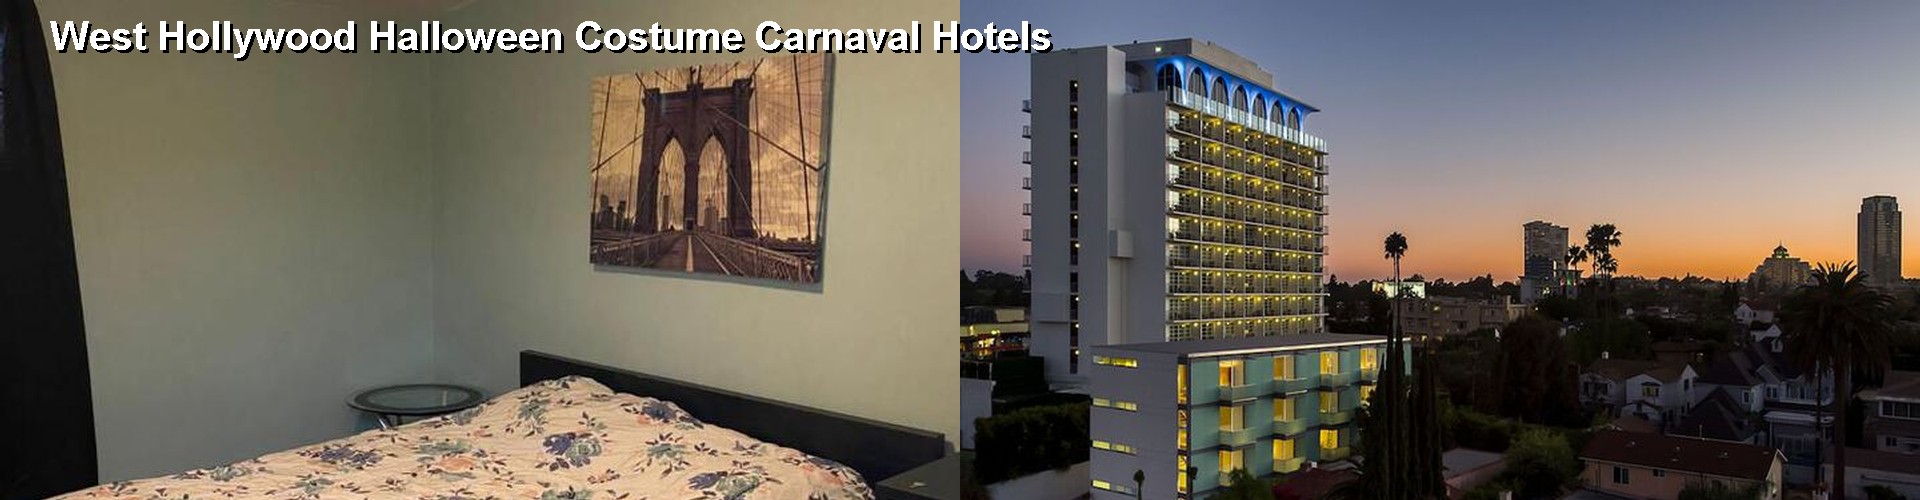 5 Best Hotels near West Hollywood Halloween Costume Carnaval